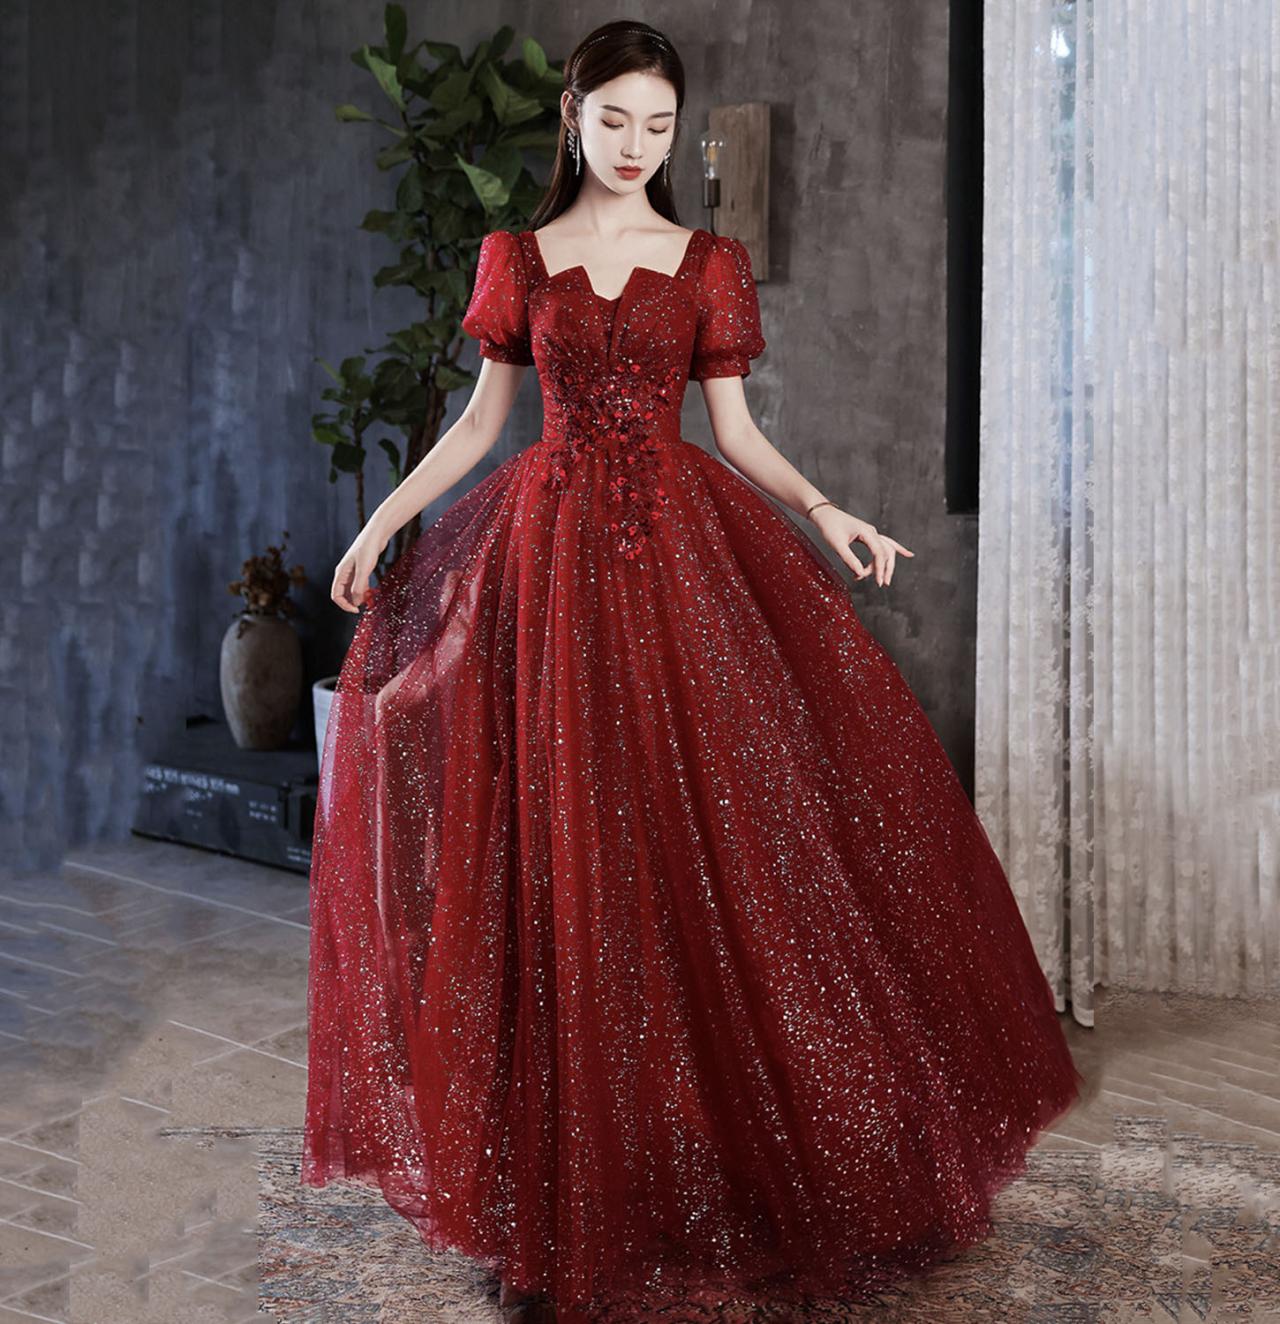 Shiny Sequin Red Tulle Ankle Length Prom Dress with Short Sleeves